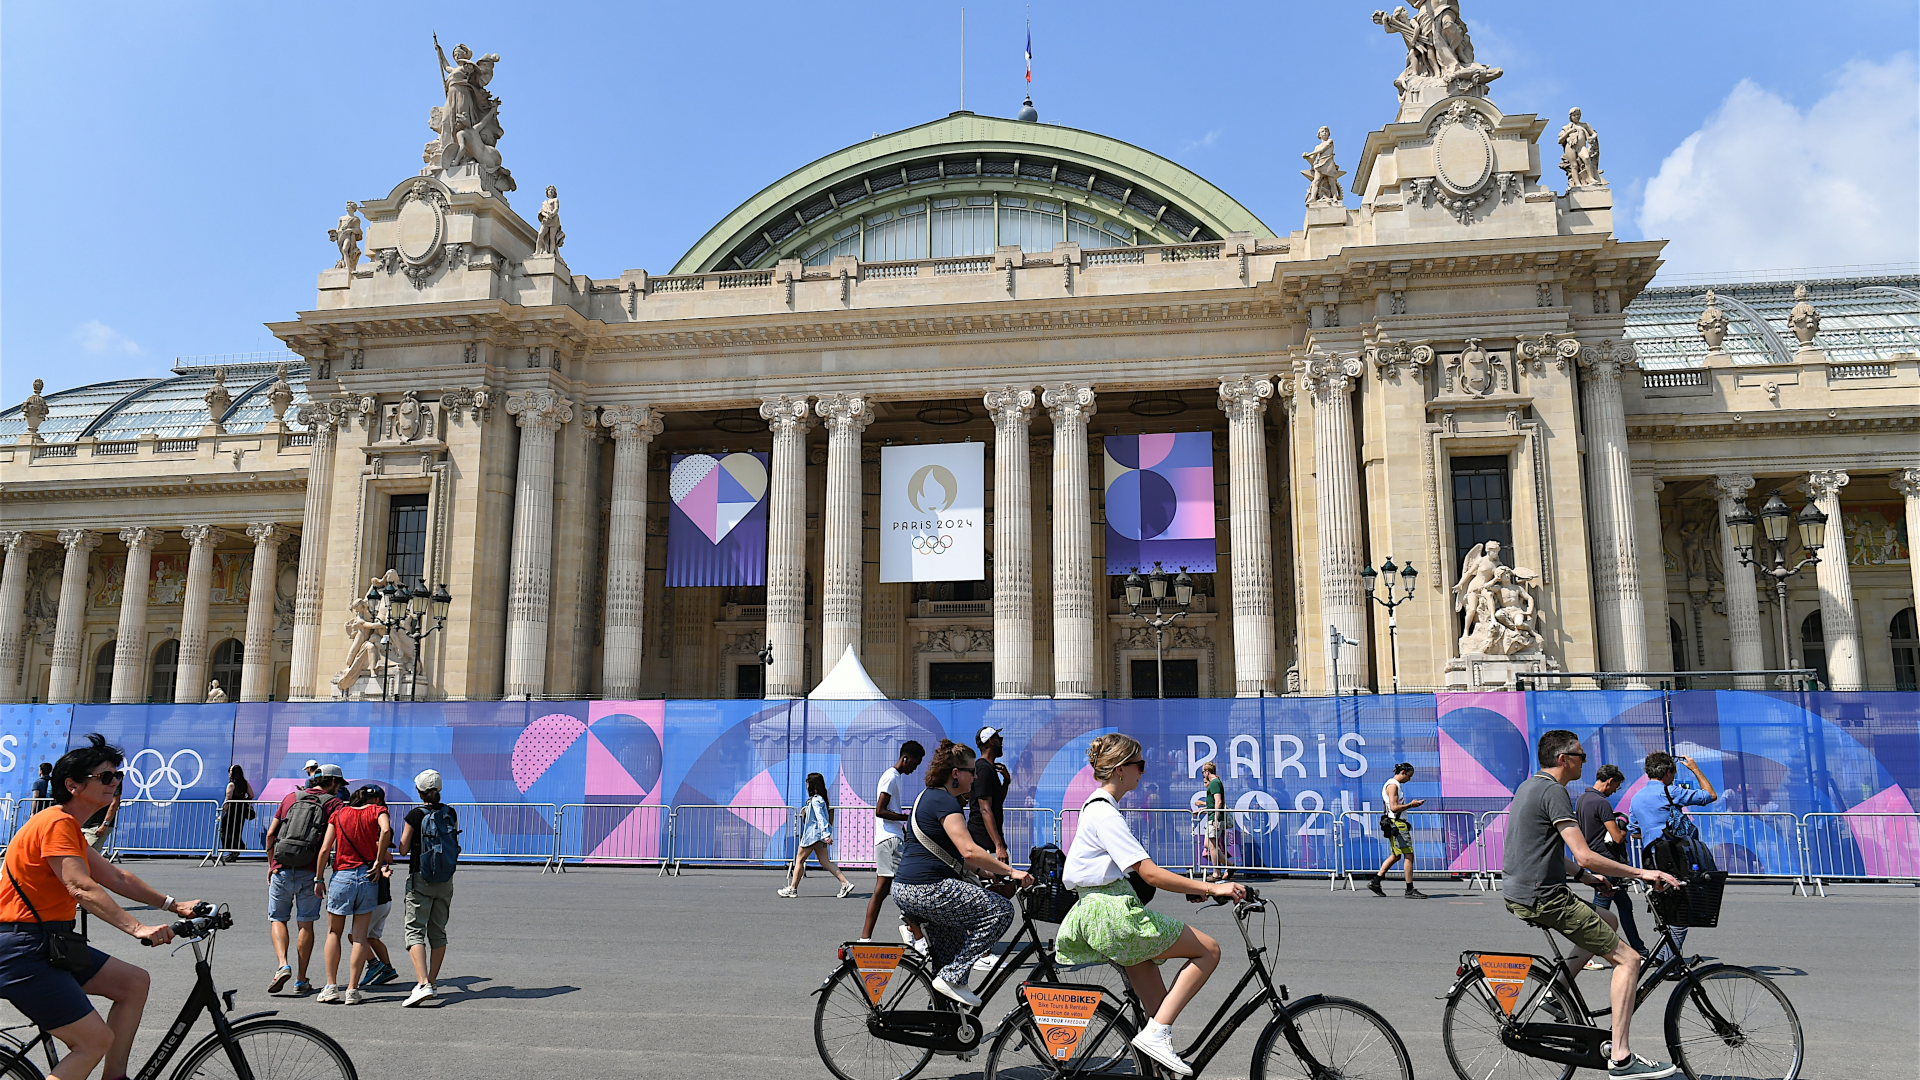 Paris 2024 Olympics Venue Hit With Cyberattack as Hackers Demand Crypto